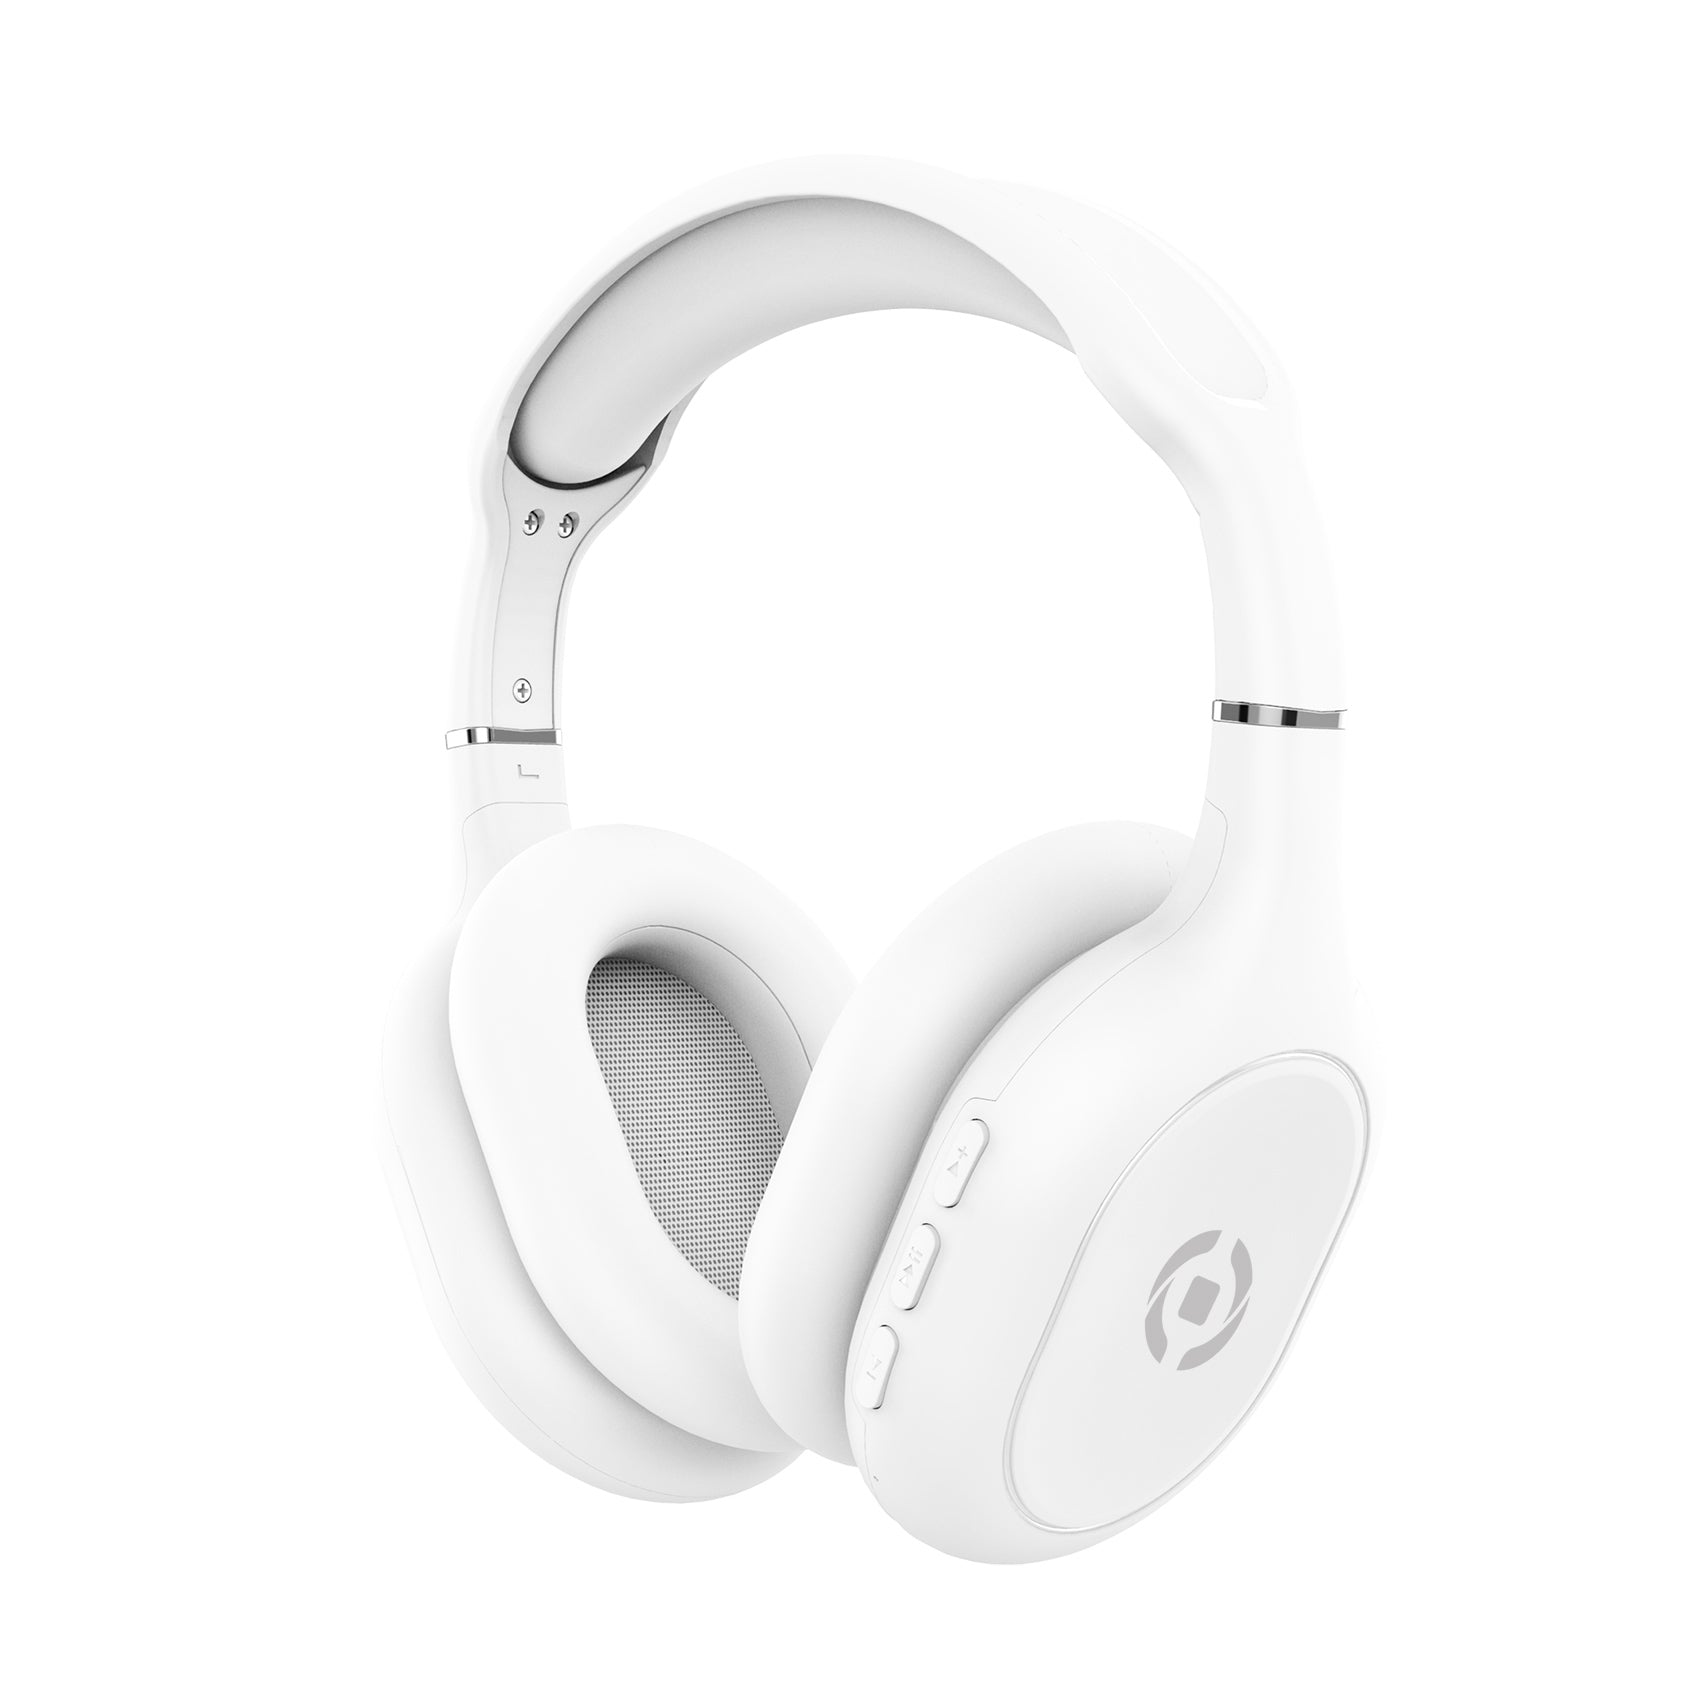 Celly BLUETOOTH STEREO HEADPHONES WHITE